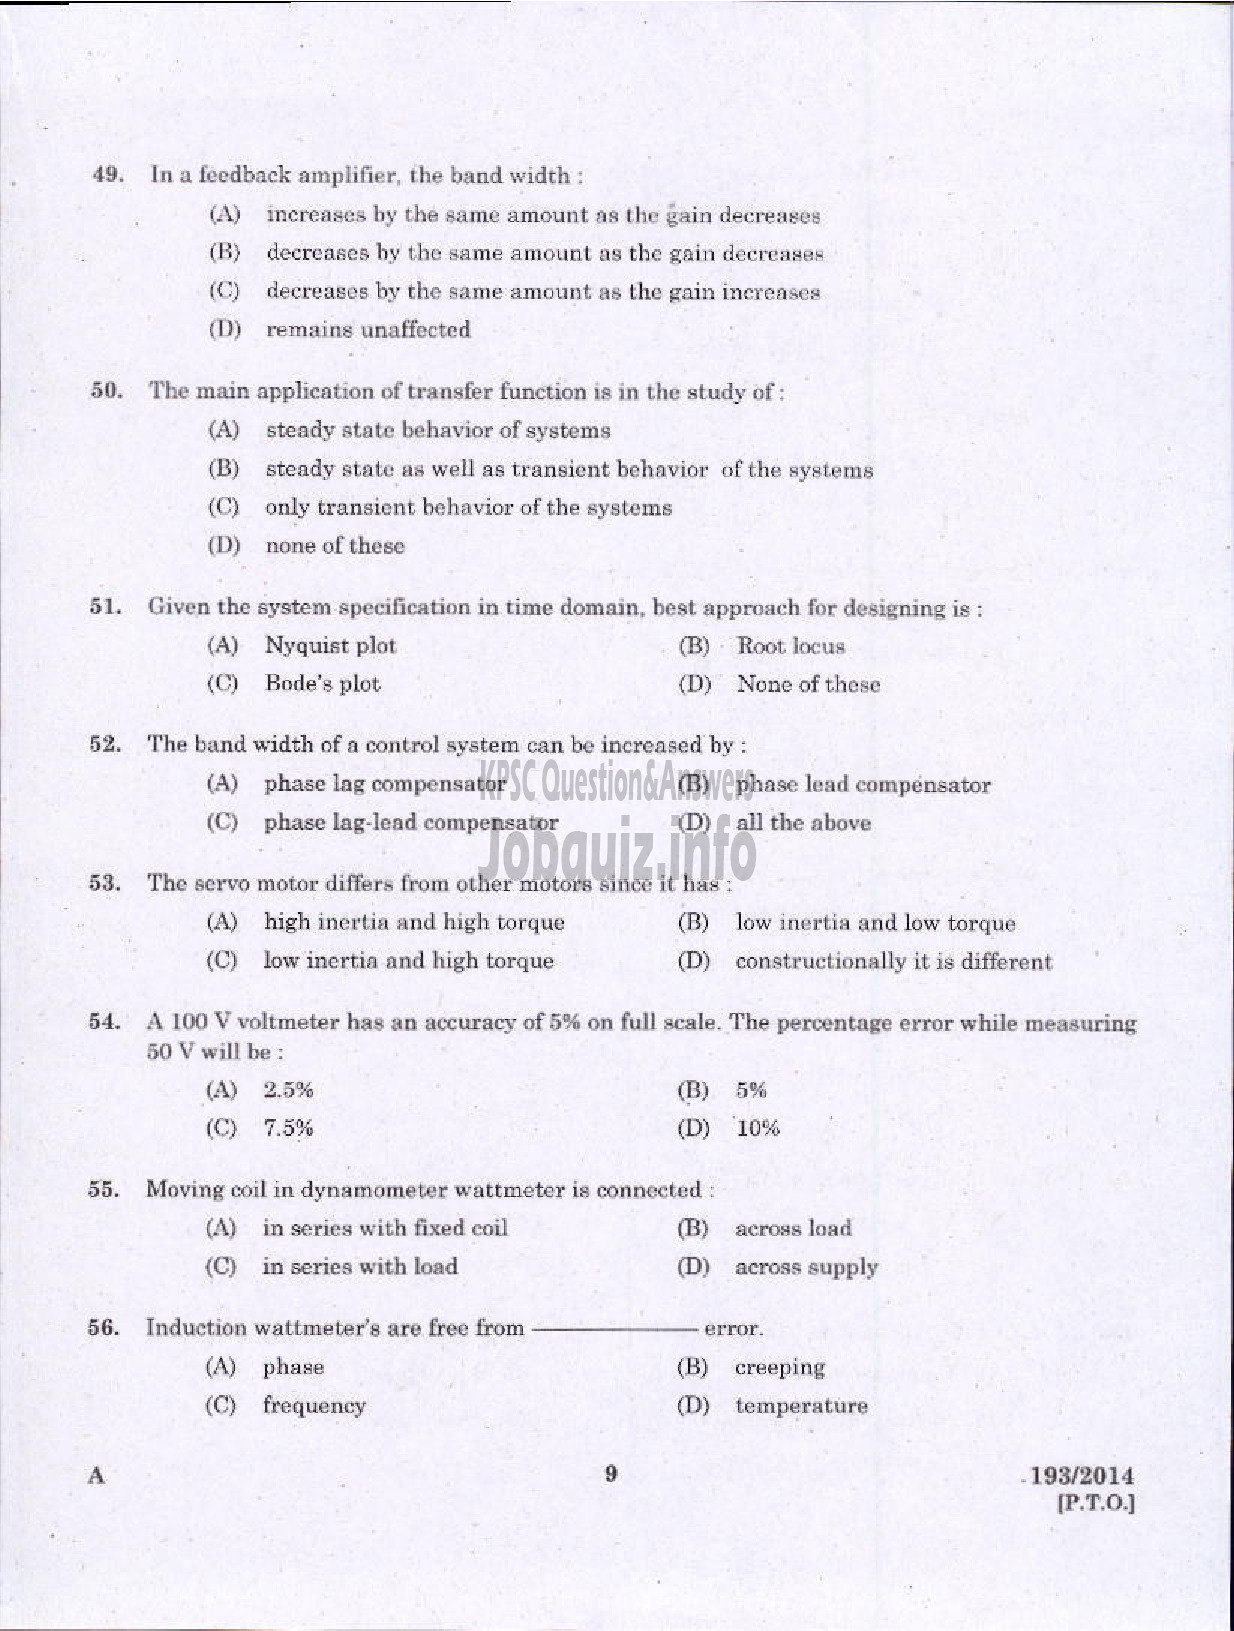 Kerala PSC Question Paper - ASSISTANT ENGINEER ELECTRICAL DIRECT AND BY TRANSFER KSEB-7